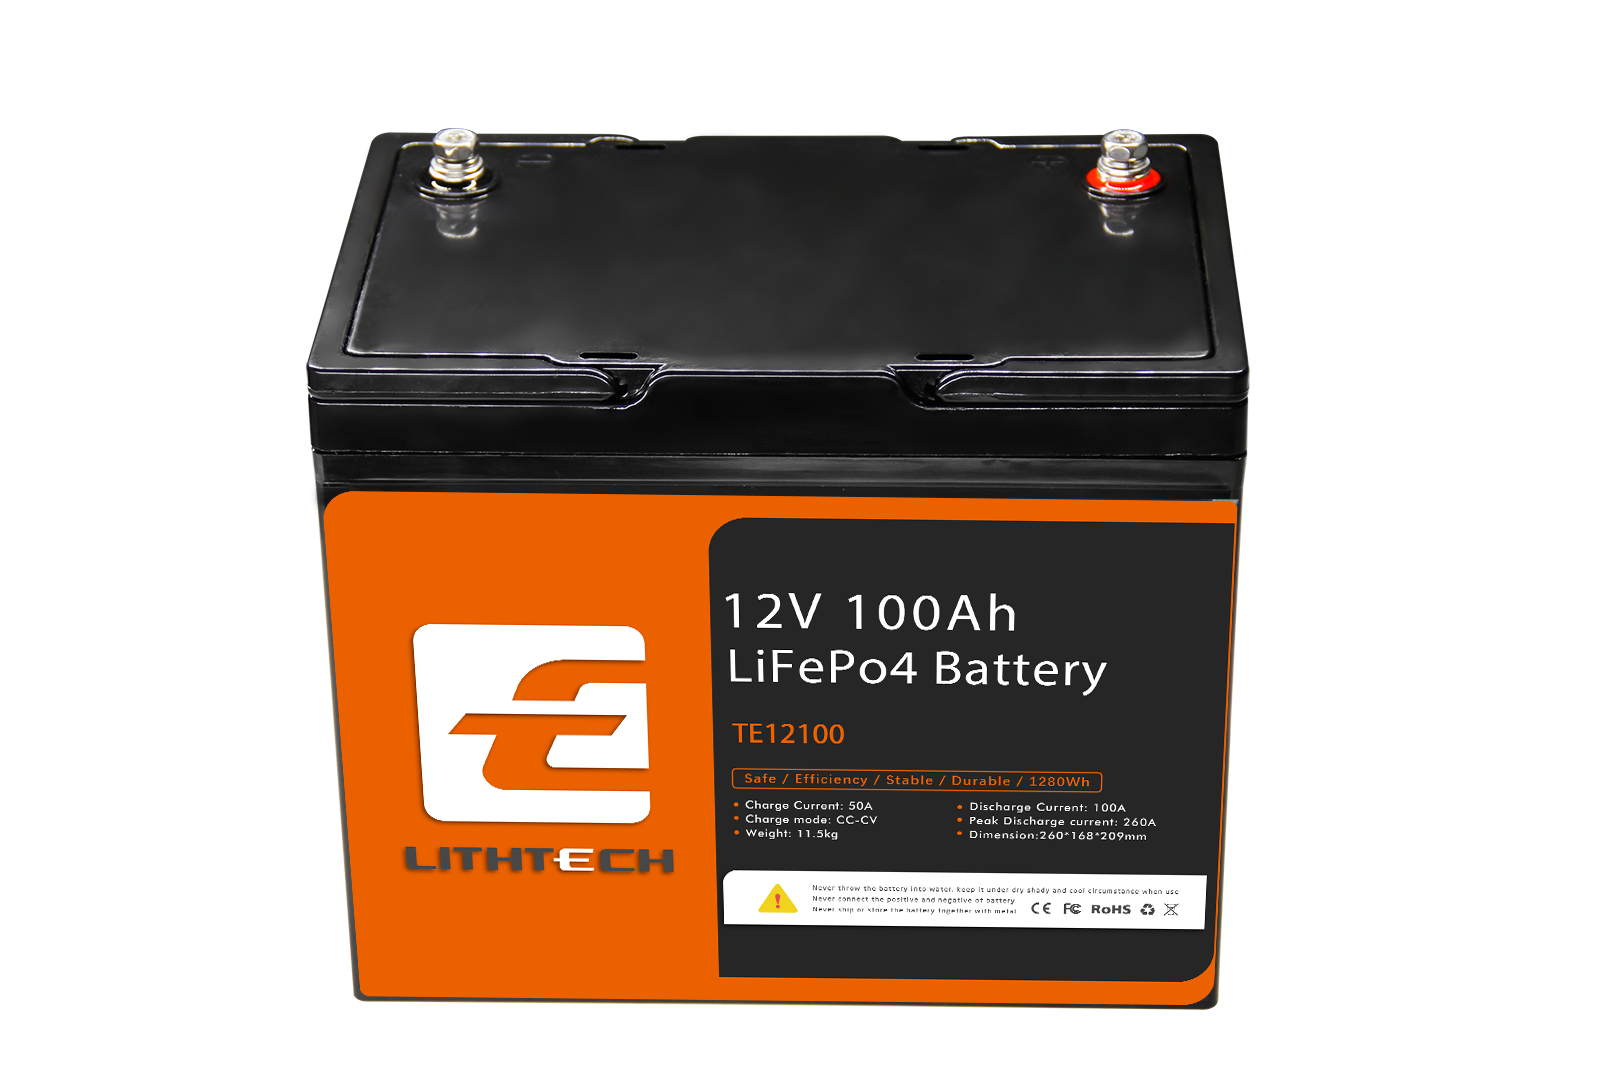 Lithtech 12.8V 100Ah LiFePo4 Battery Pack with bluetooth